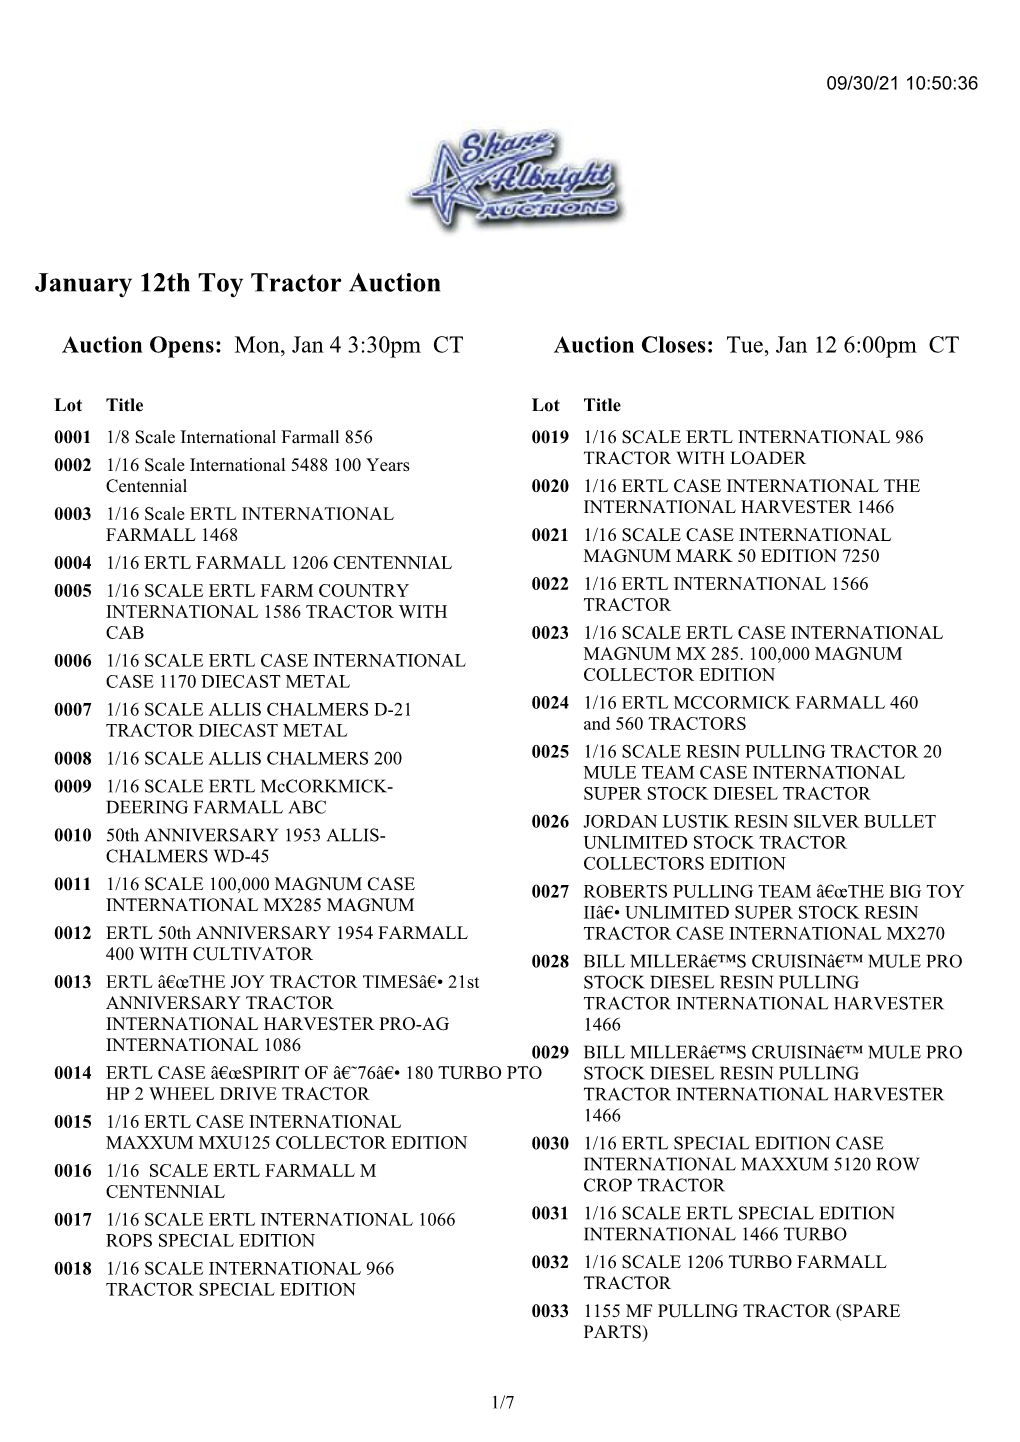 January 12Th Toy Tractor Auction